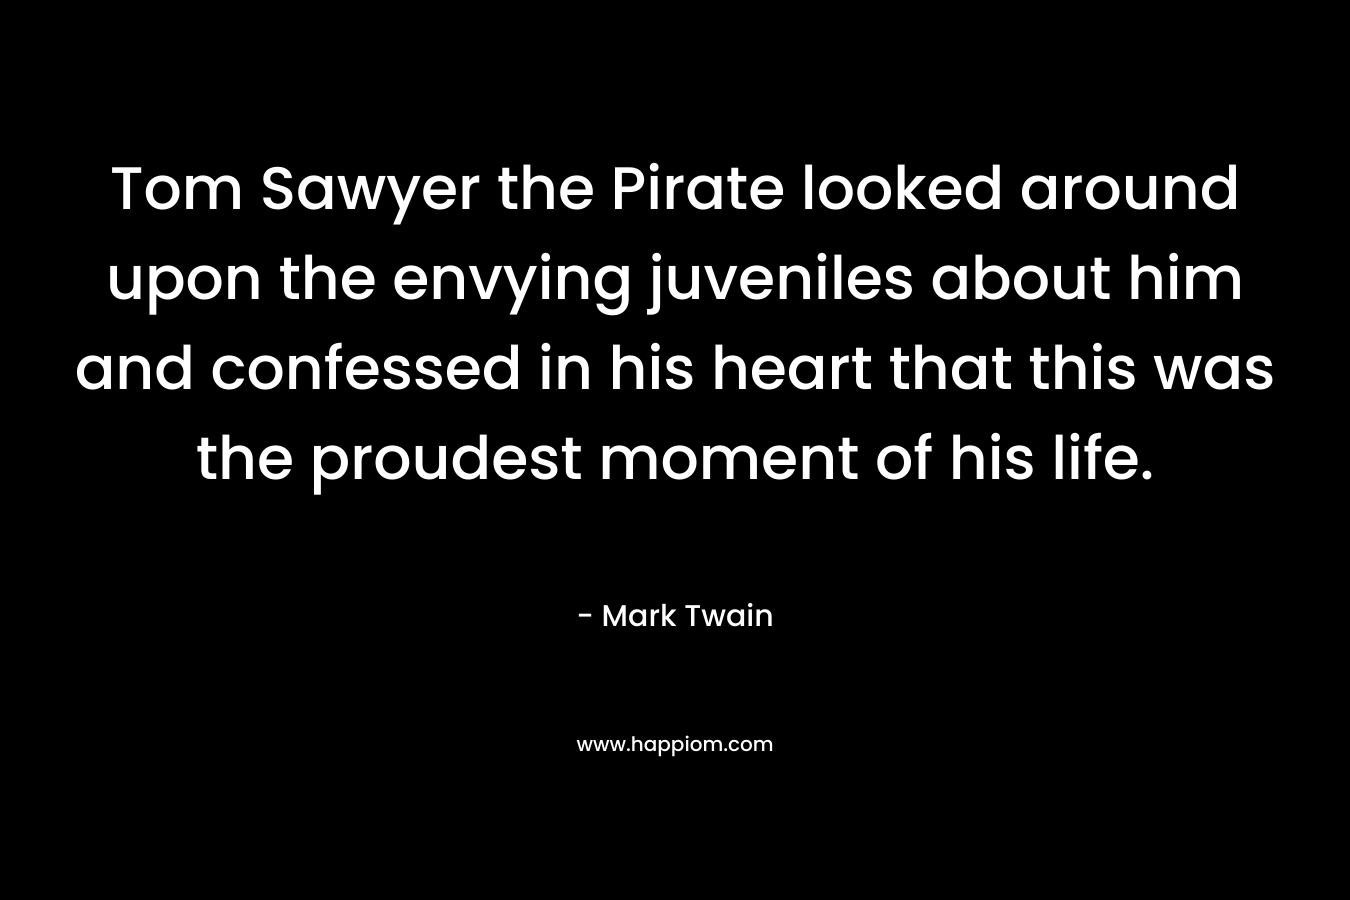 Tom Sawyer the Pirate looked around upon the envying juveniles about him and confessed in his heart that this was the proudest moment of his life. – Mark Twain